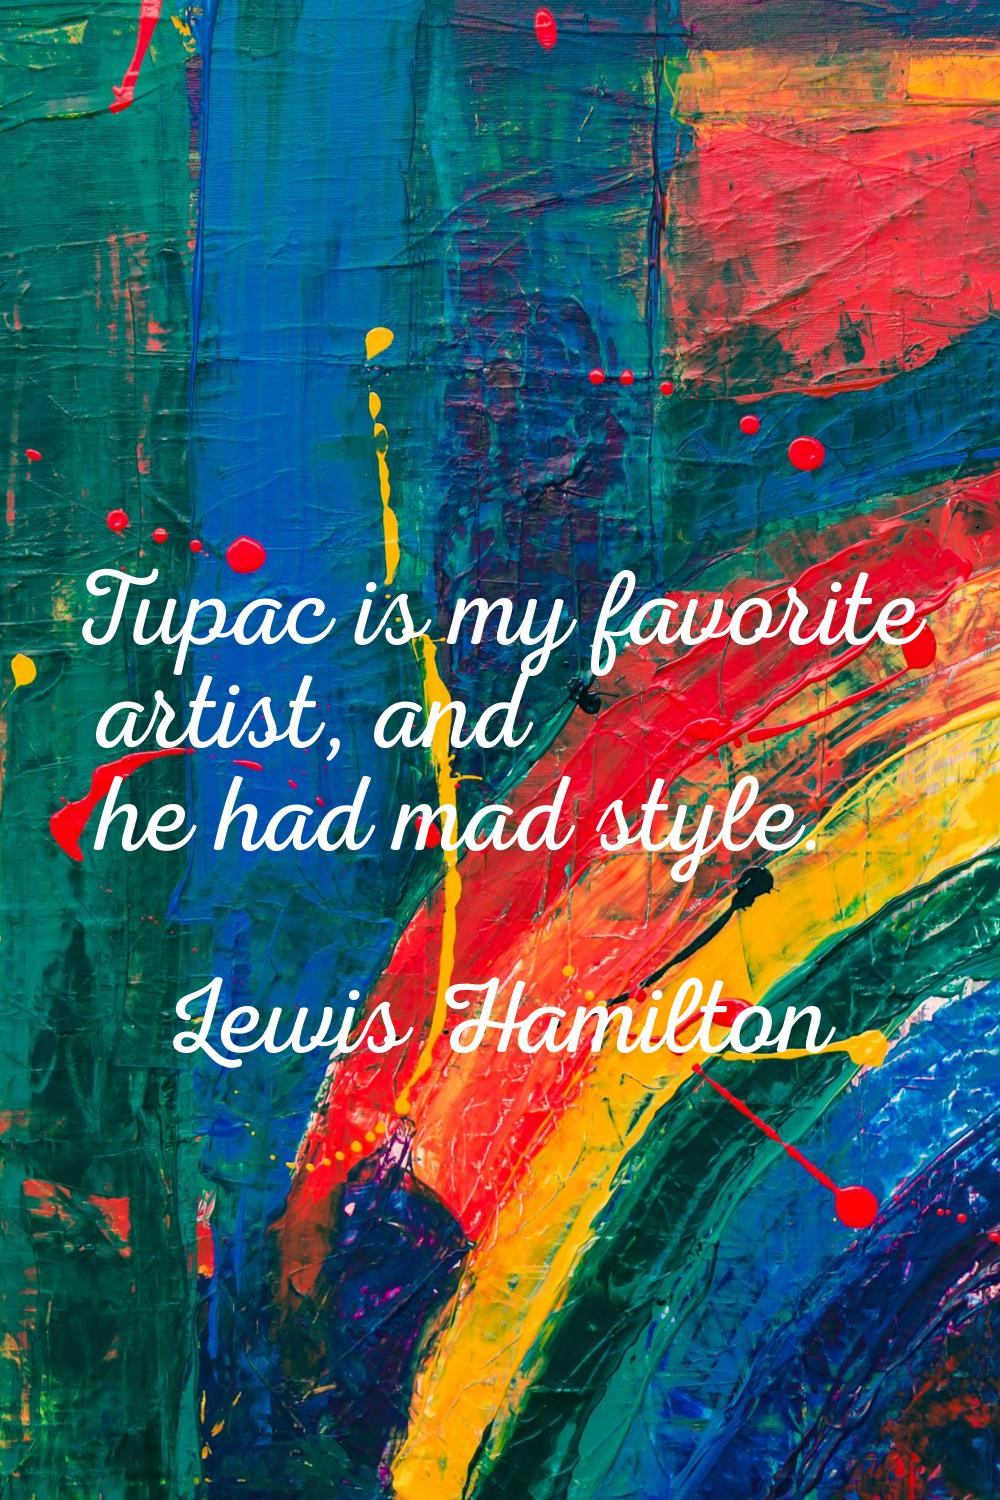 Tupac is my favorite artist, and he had mad style.